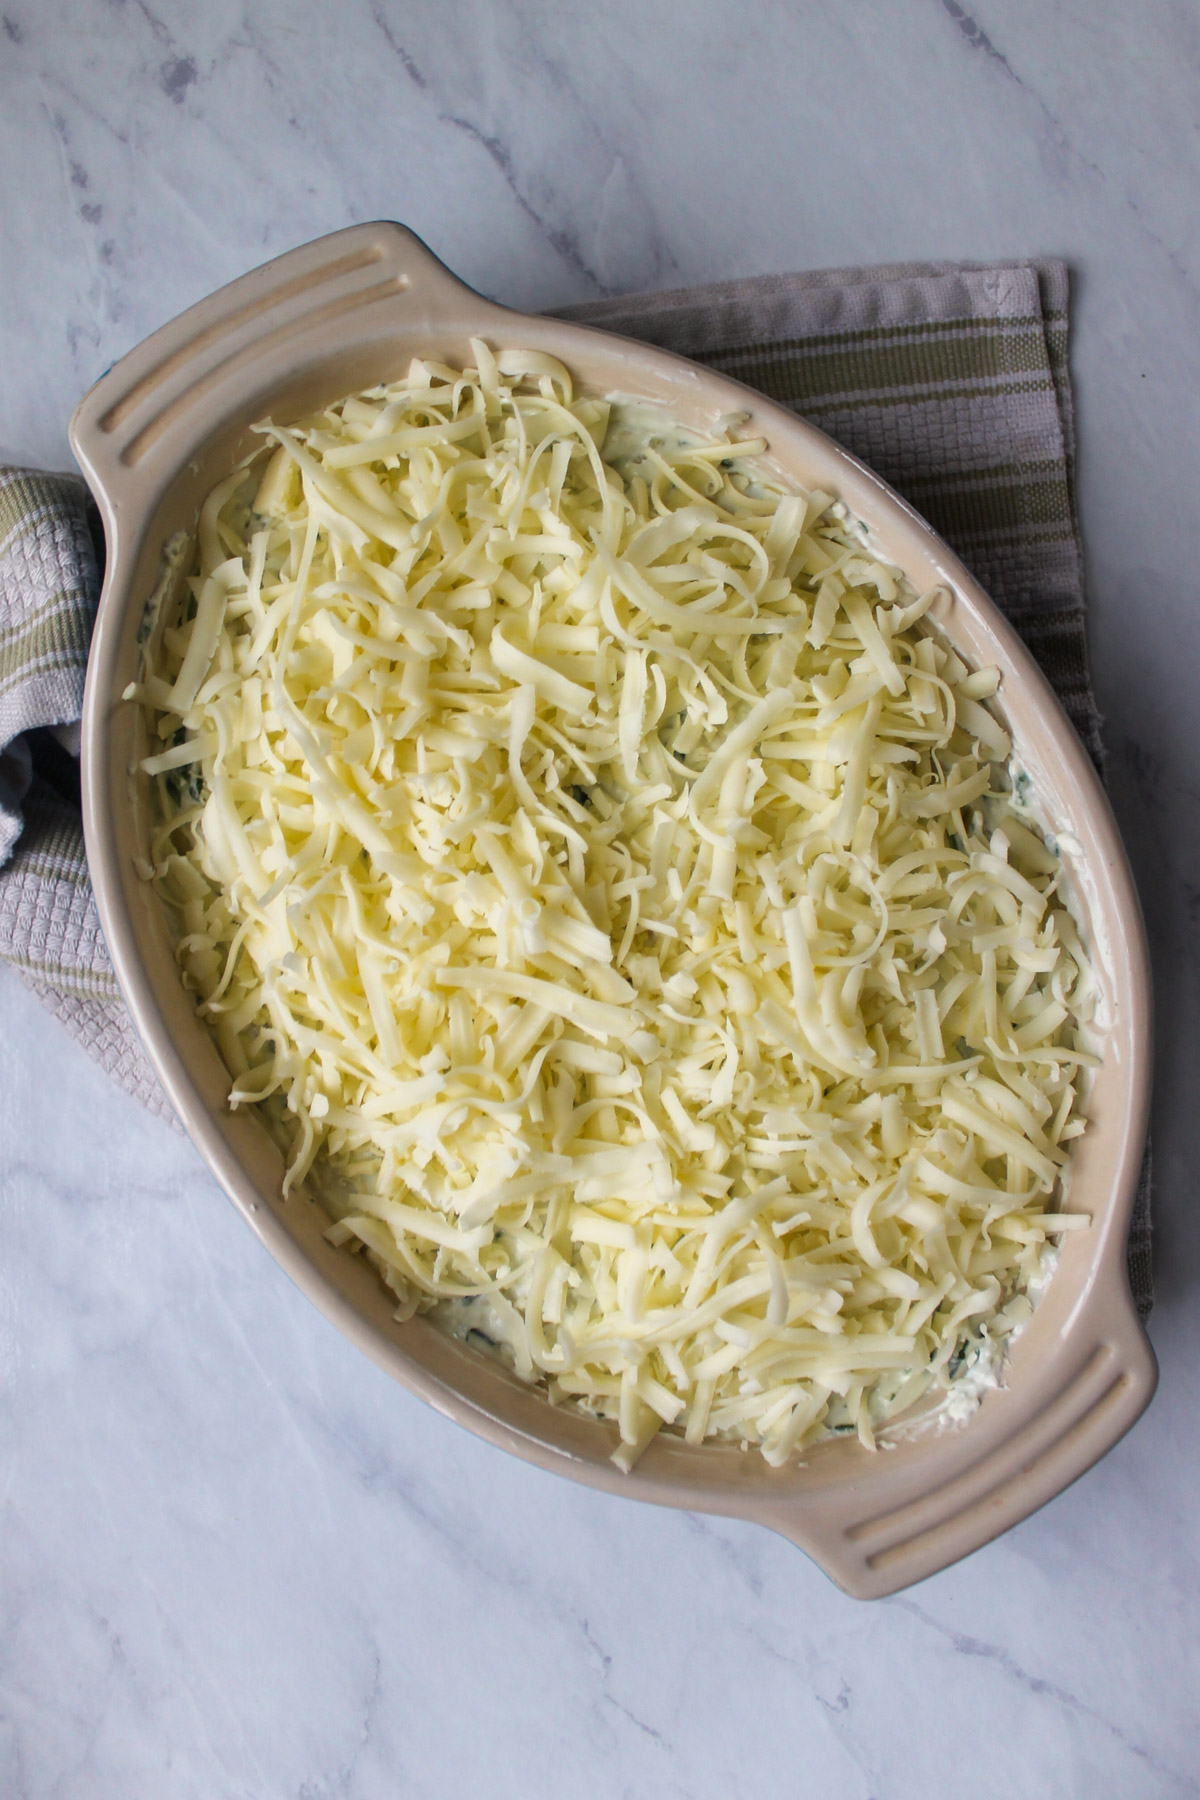 An oval baking dish with the artichoke dip and shredded white cheddar cheese ready to bake.